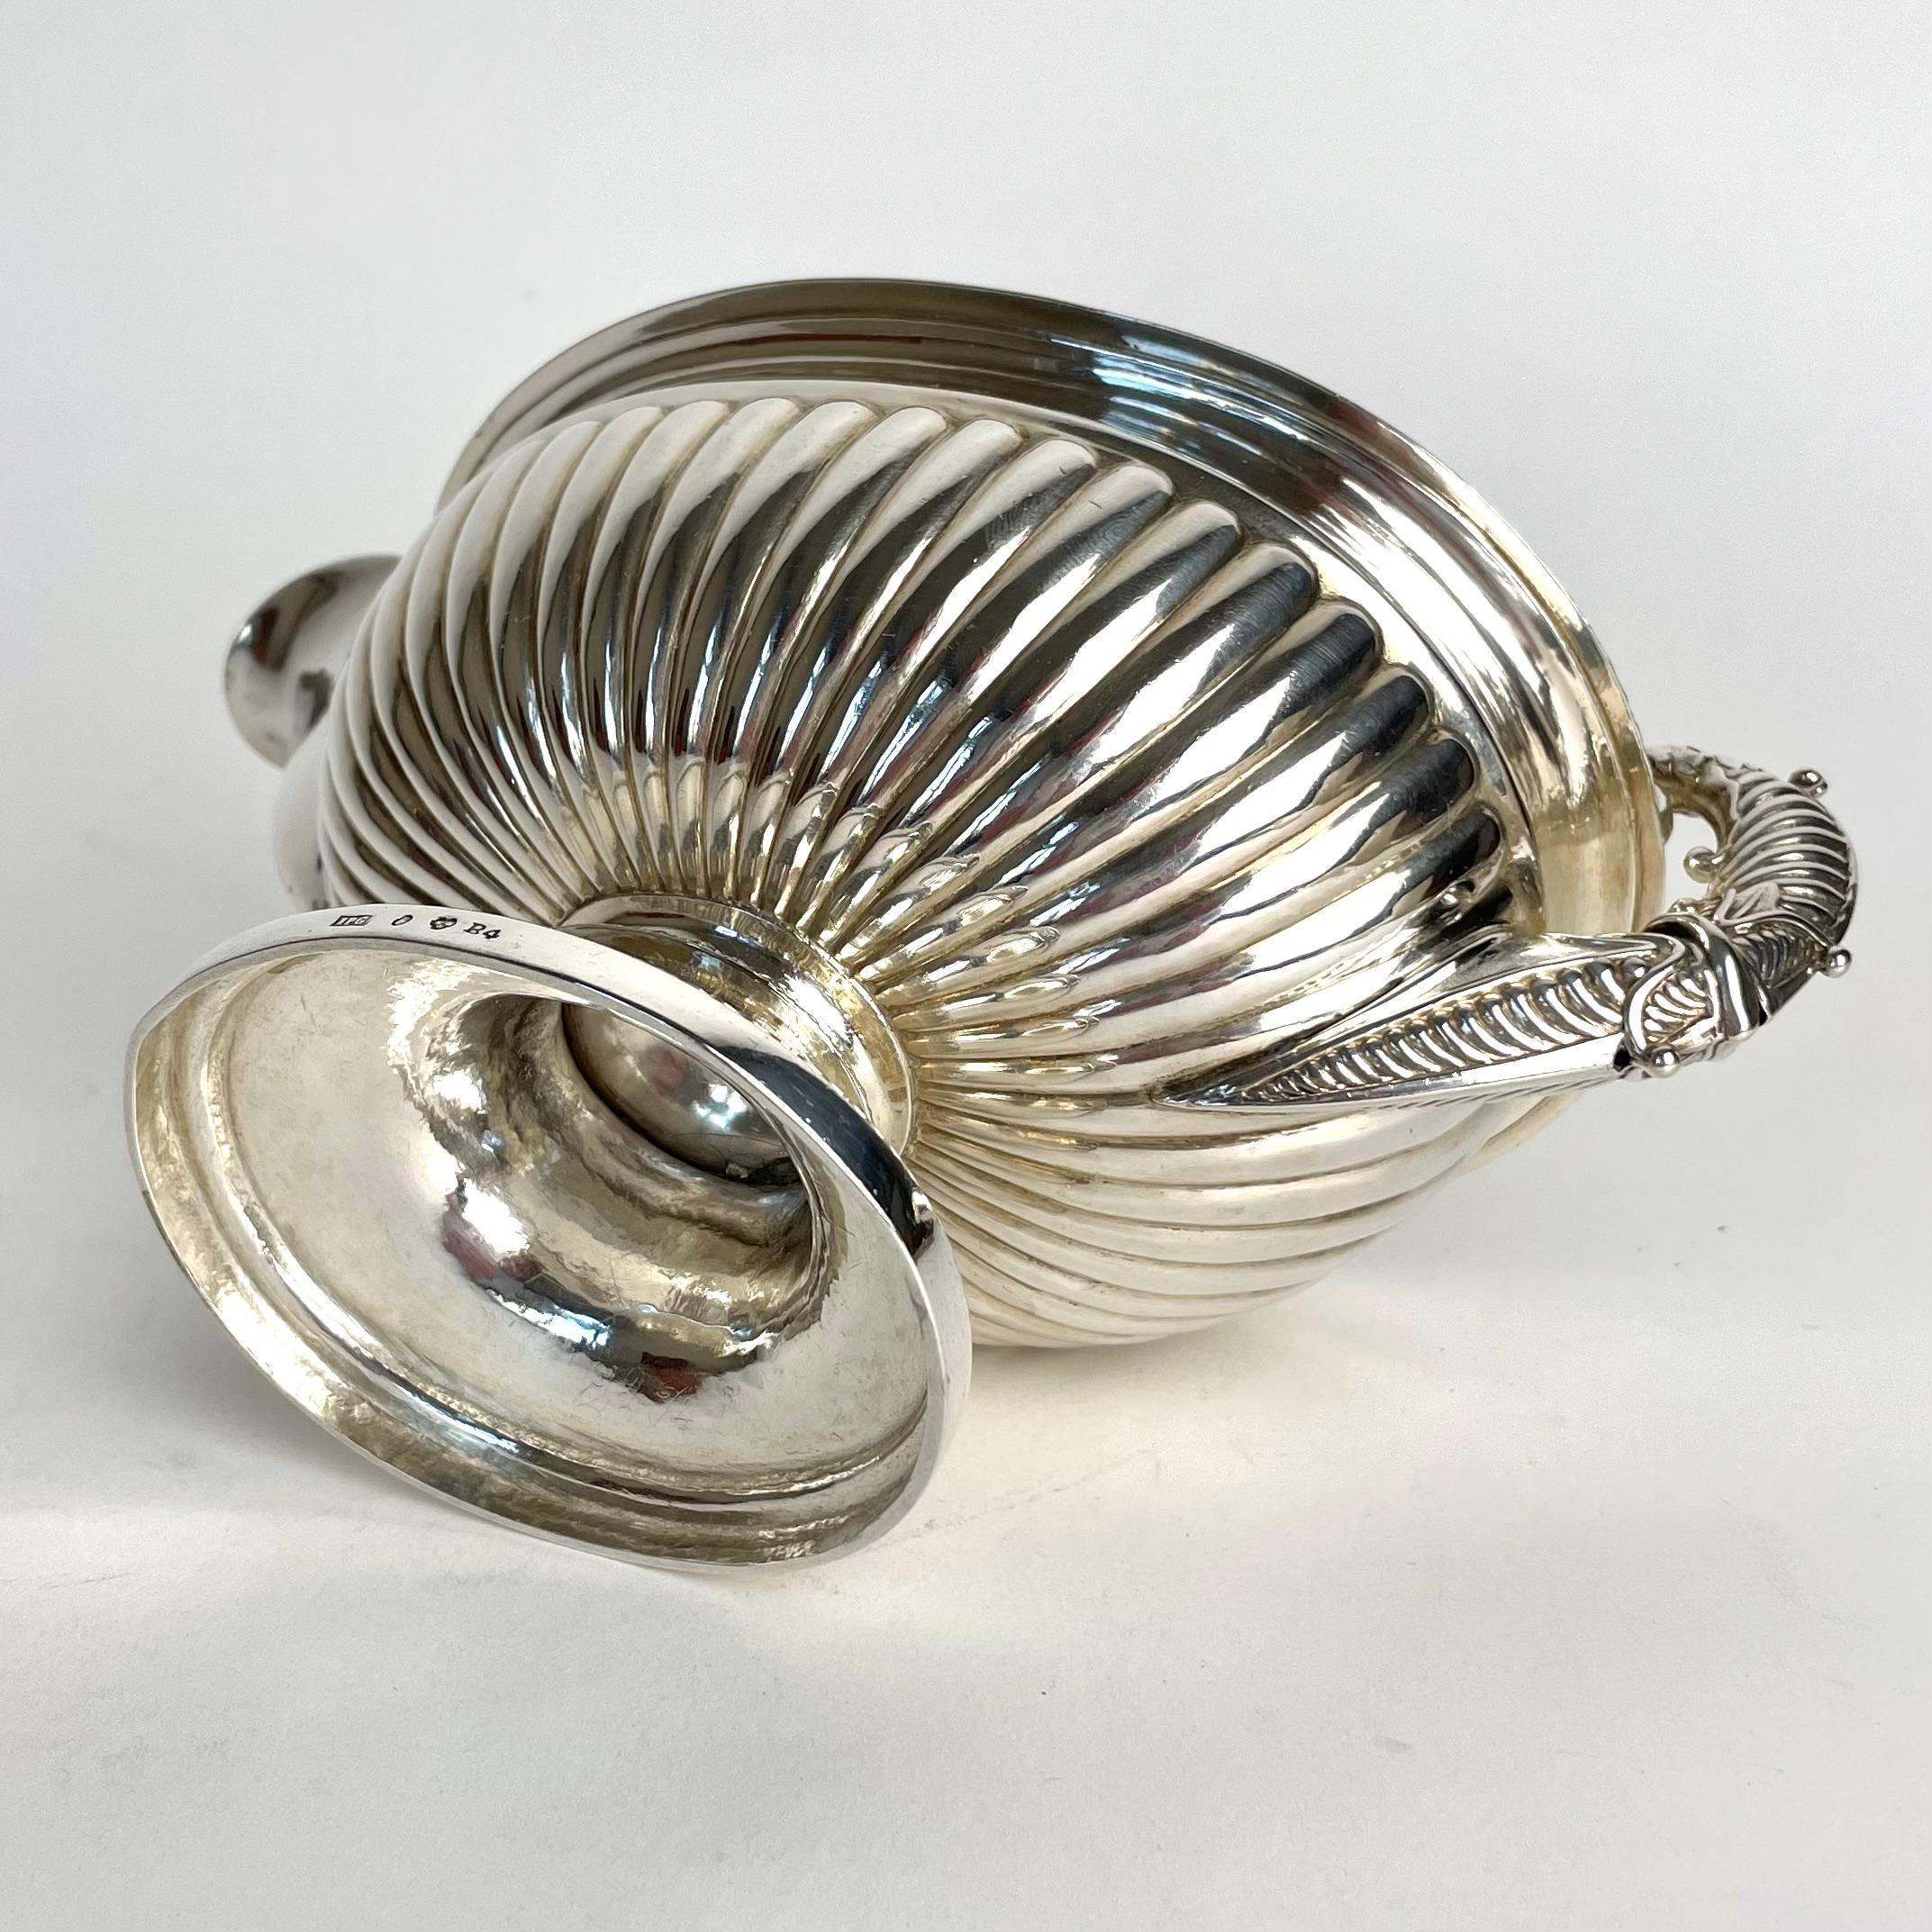 Beautiful Sauce Boat in Silver by Johan Petter Grönvall, Sweden from 1832 For Sale 4